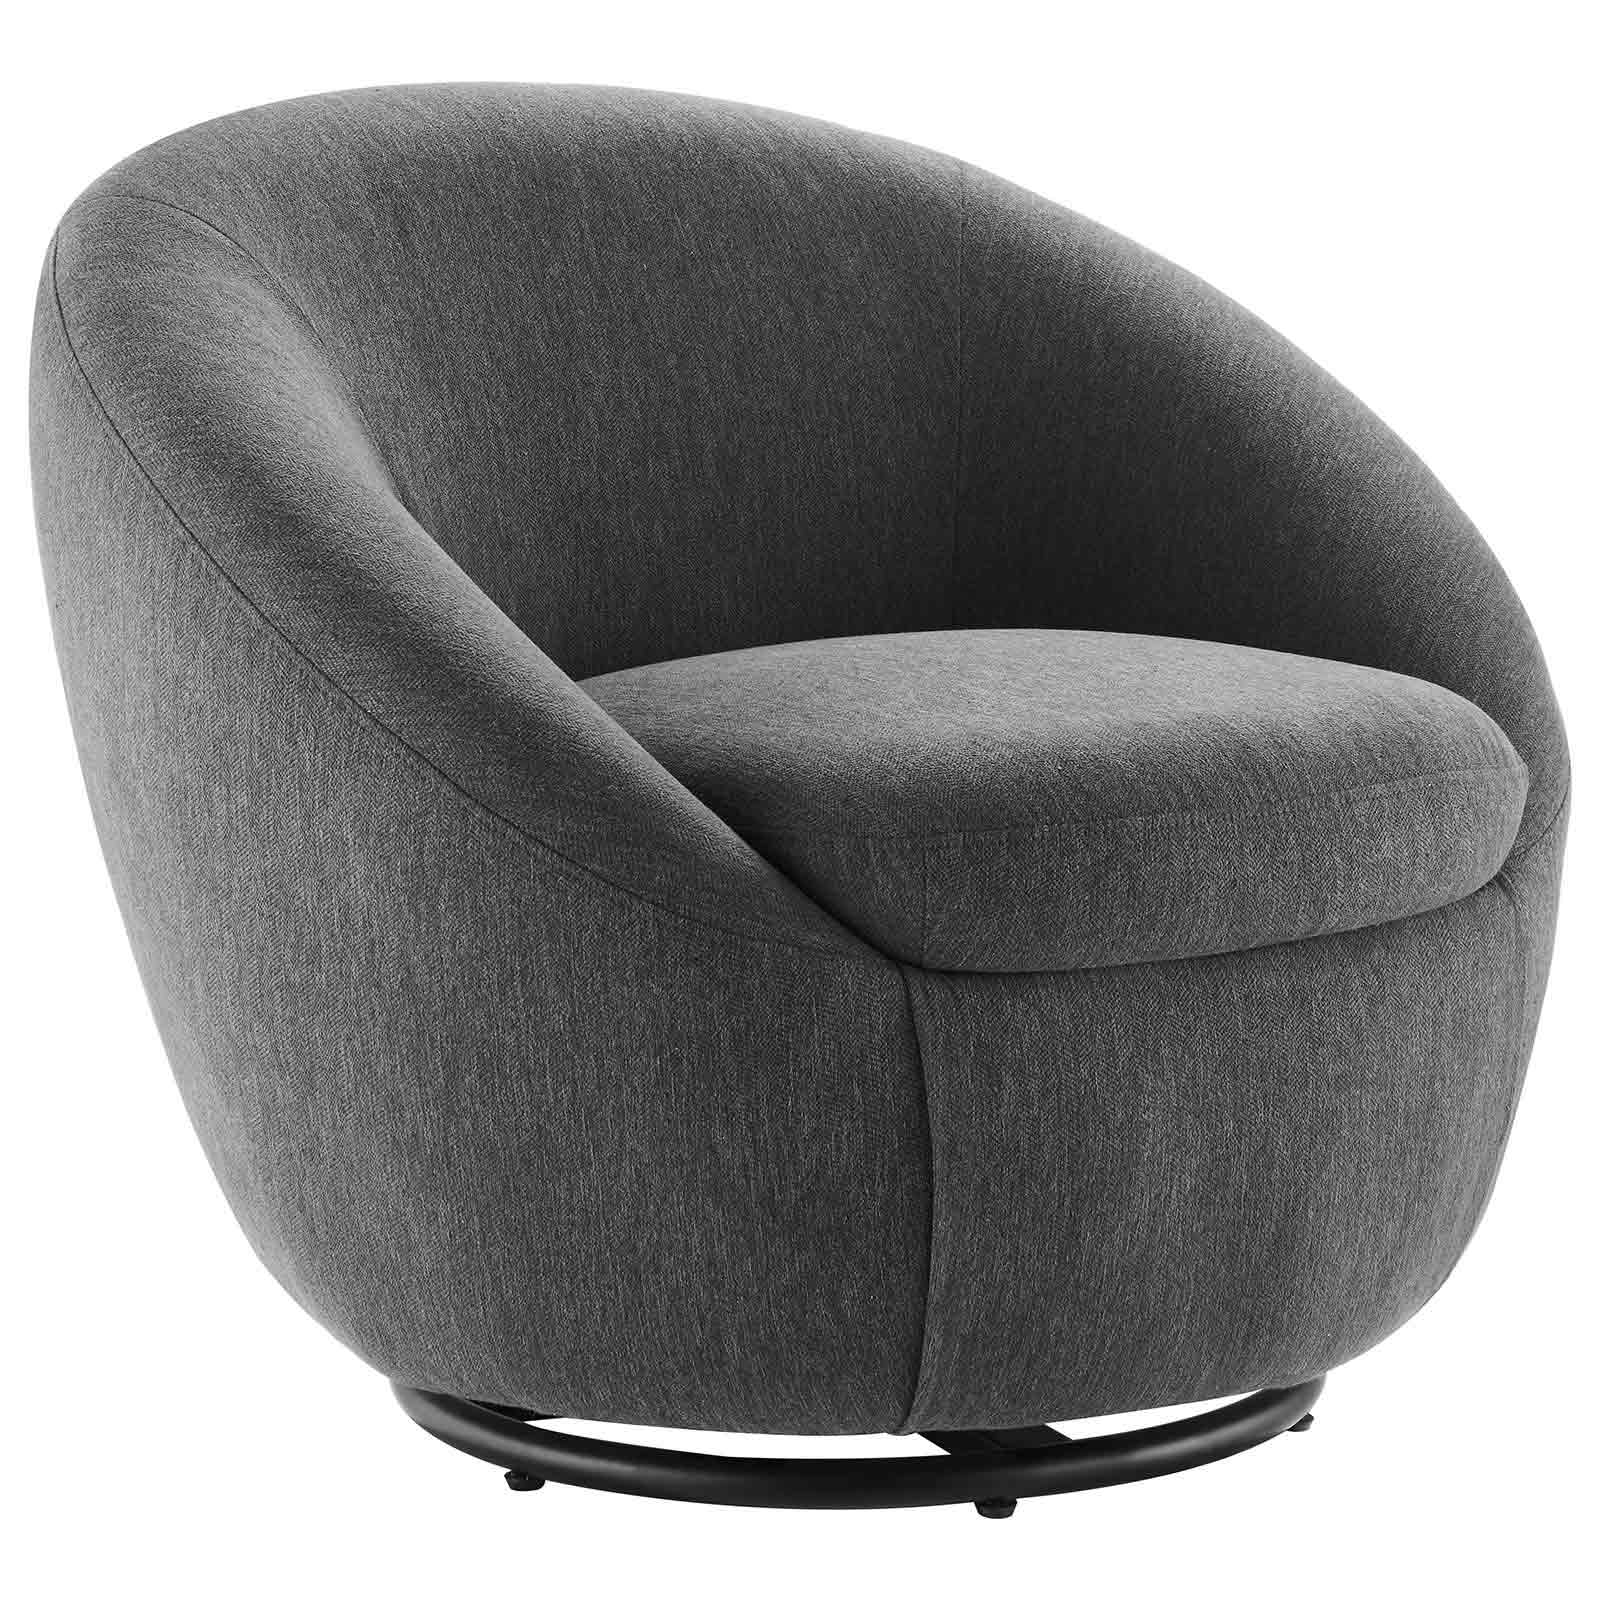 Buttercup Fabric Upholstered Upholstered Fabric Swivel Chair